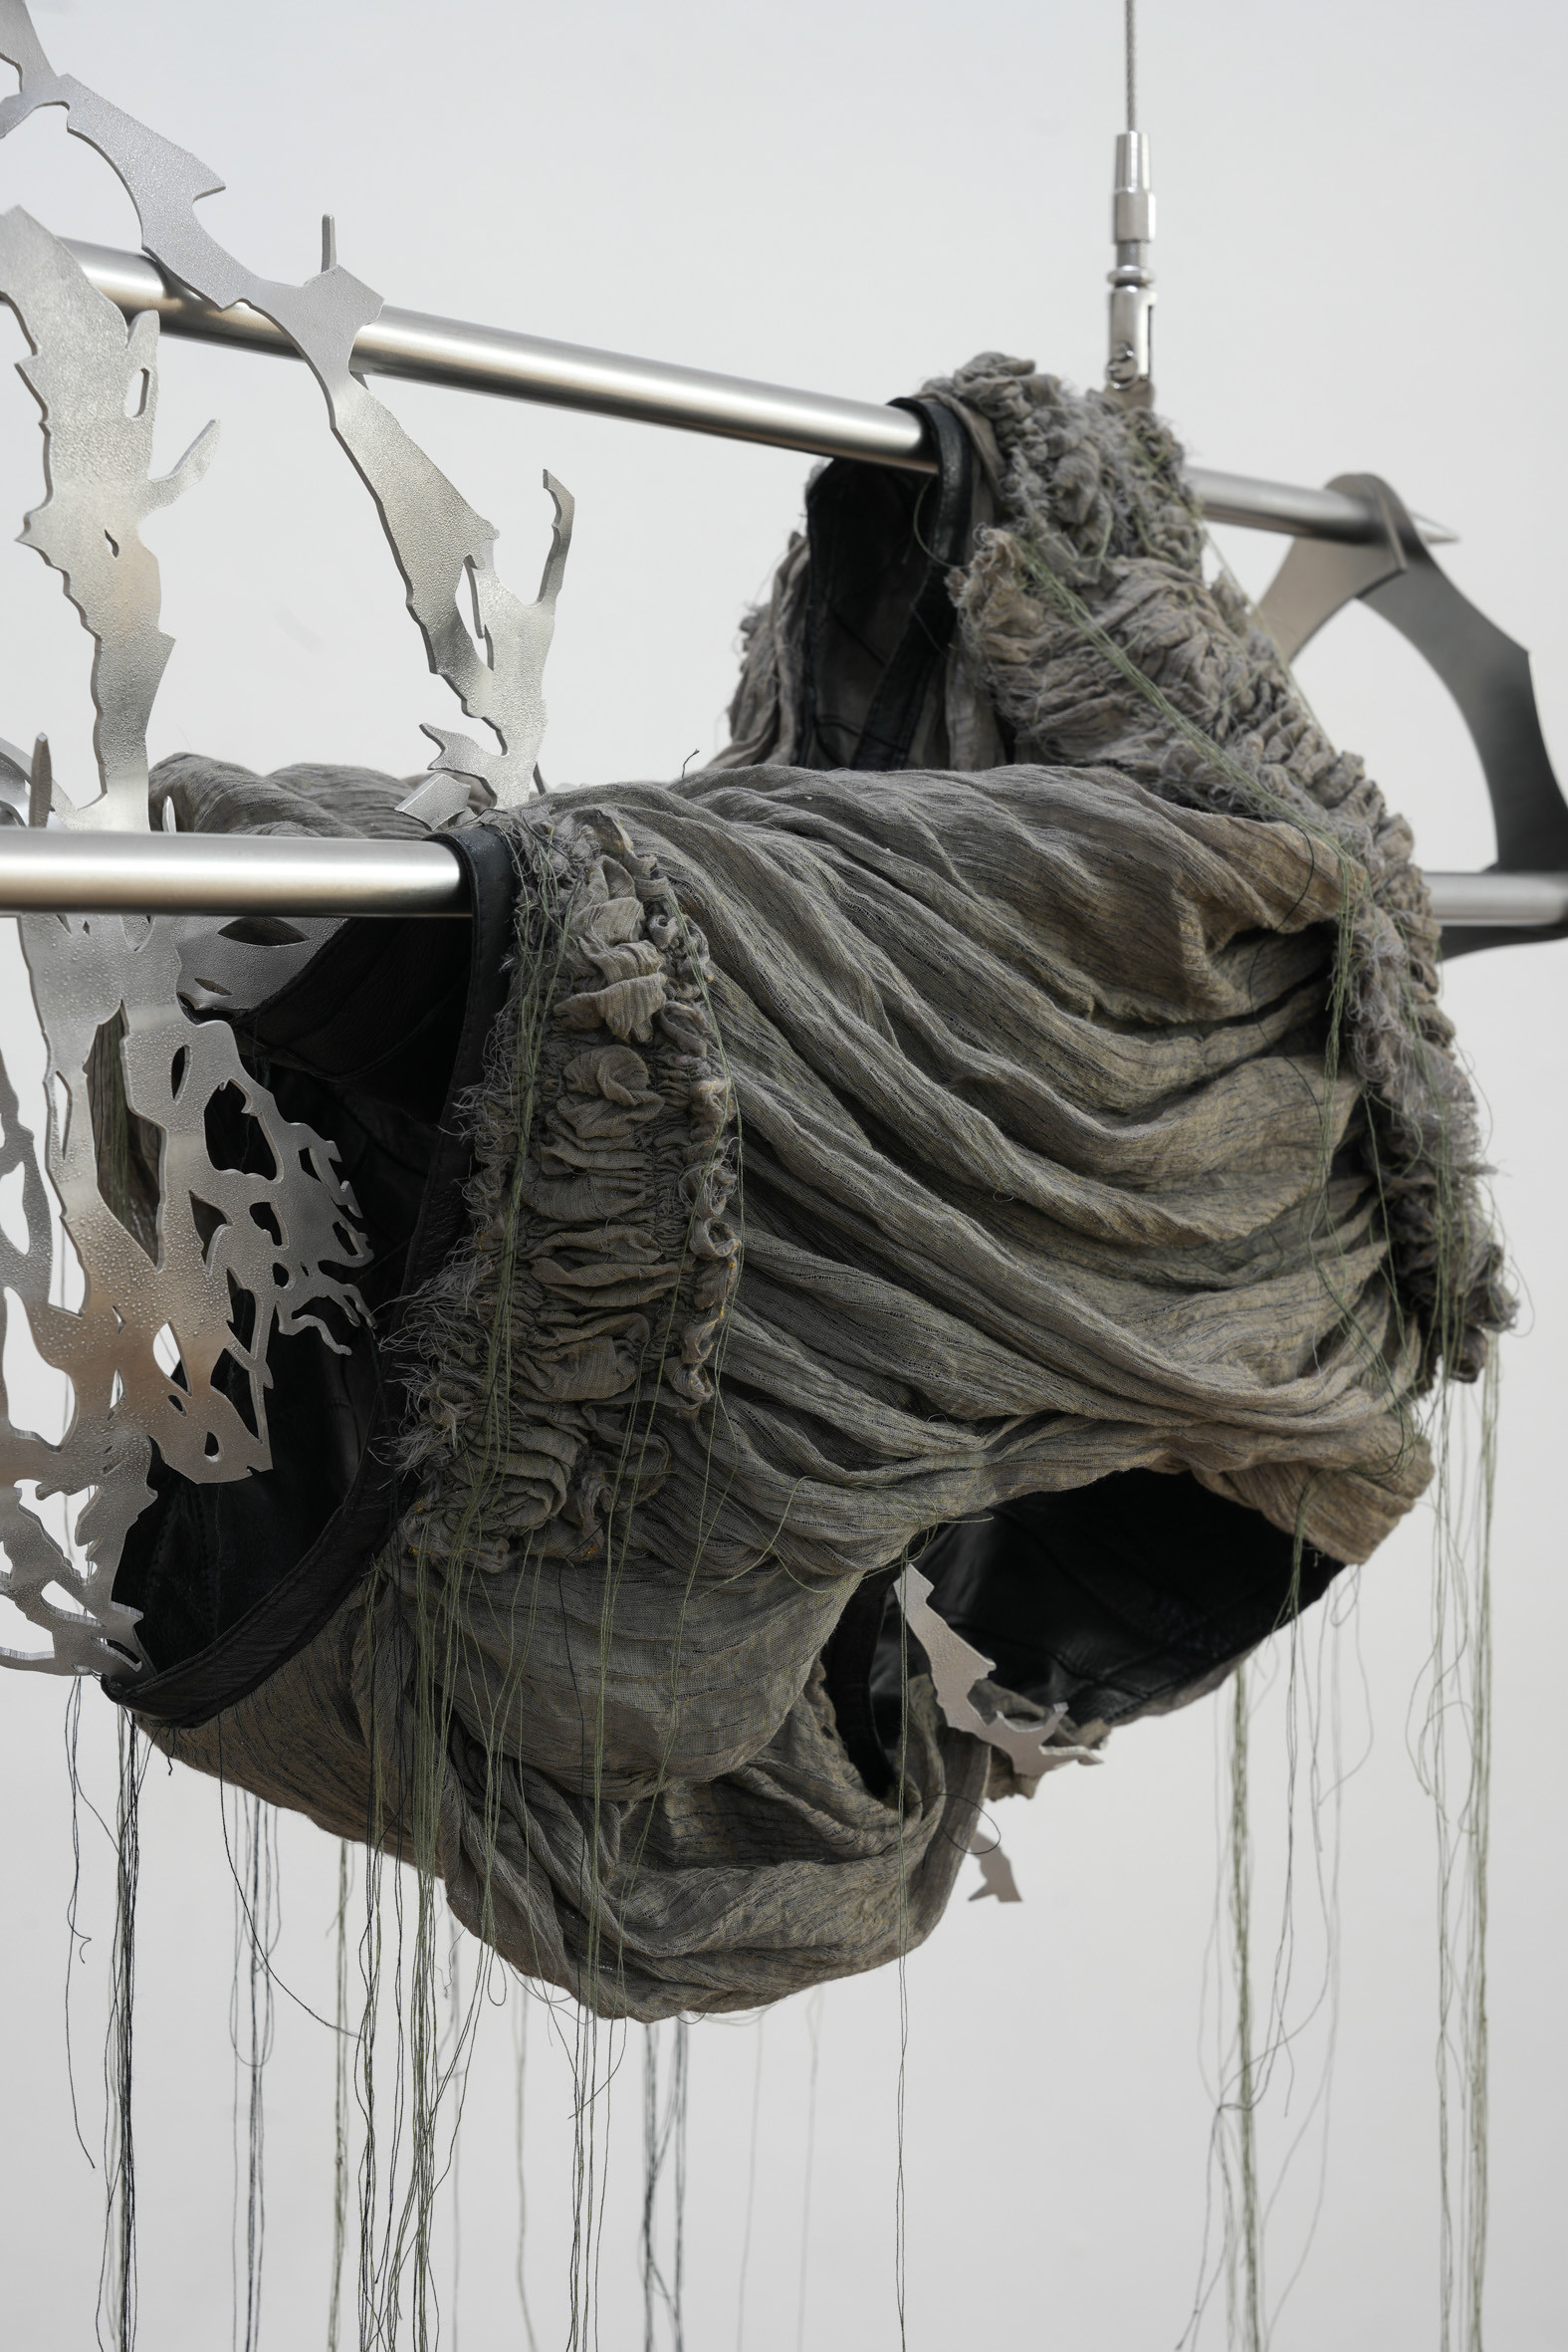 Premonition I, stainless steel, aluminum, linen, recycled leather, 2022